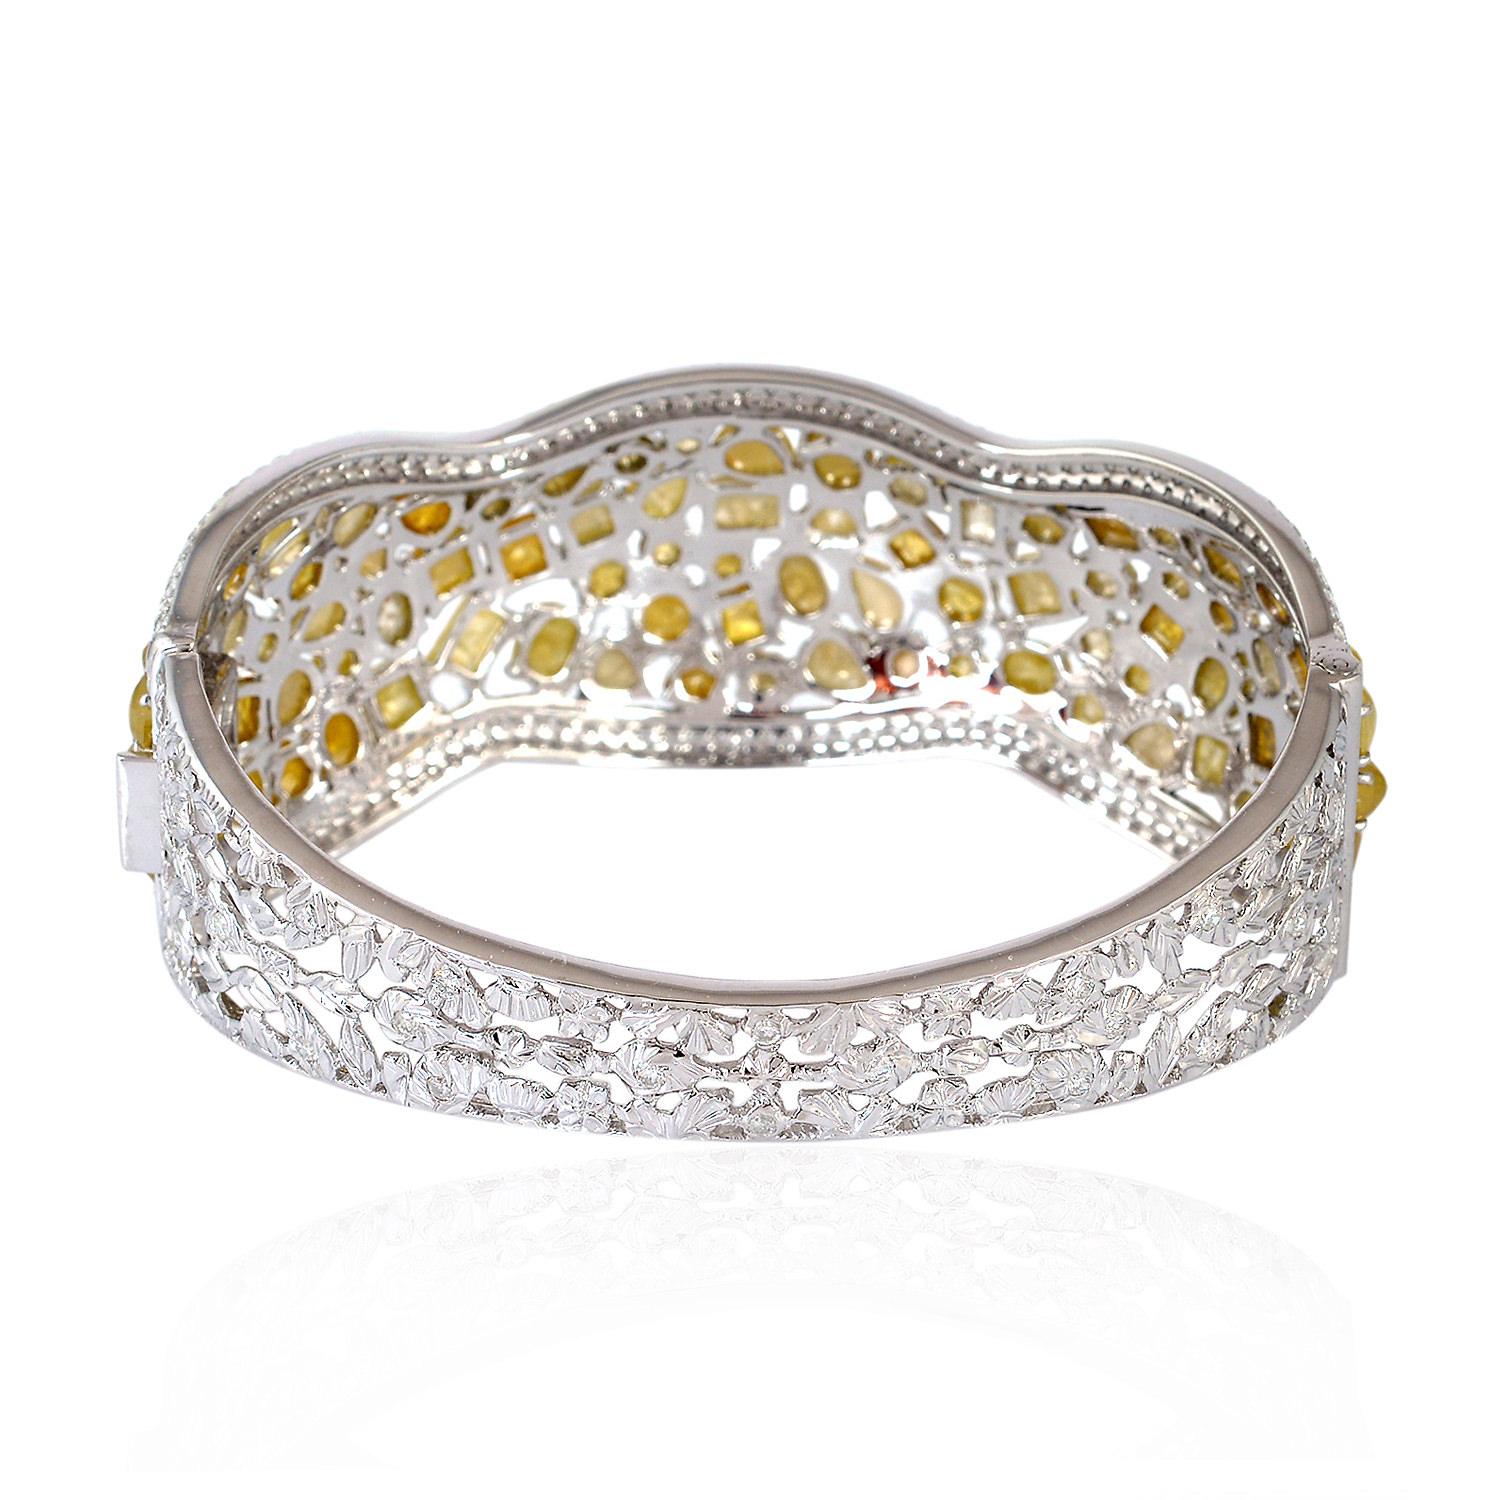 Uncut 24.83ct Yellow Ice Diamond and White Diamond Bangle Set Made in 18K White Gold For Sale